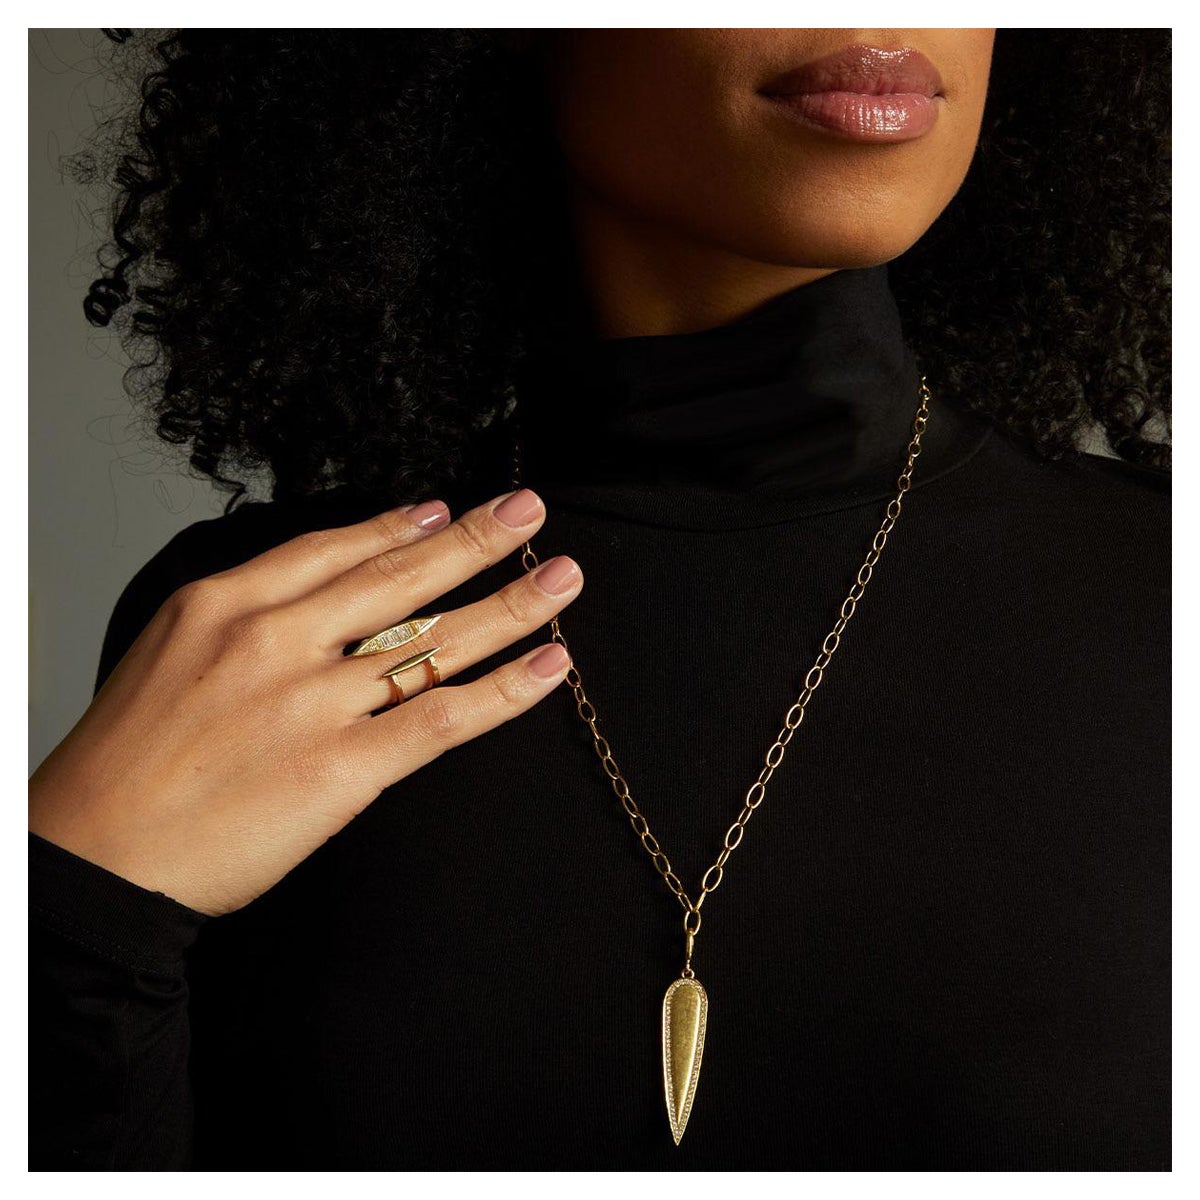 The Large Engravable Nifo is modeled after the classic whale tooth shape and features a Natural Diamond frame. This 18k yellow gold Pendant was inspired by one simple question,

